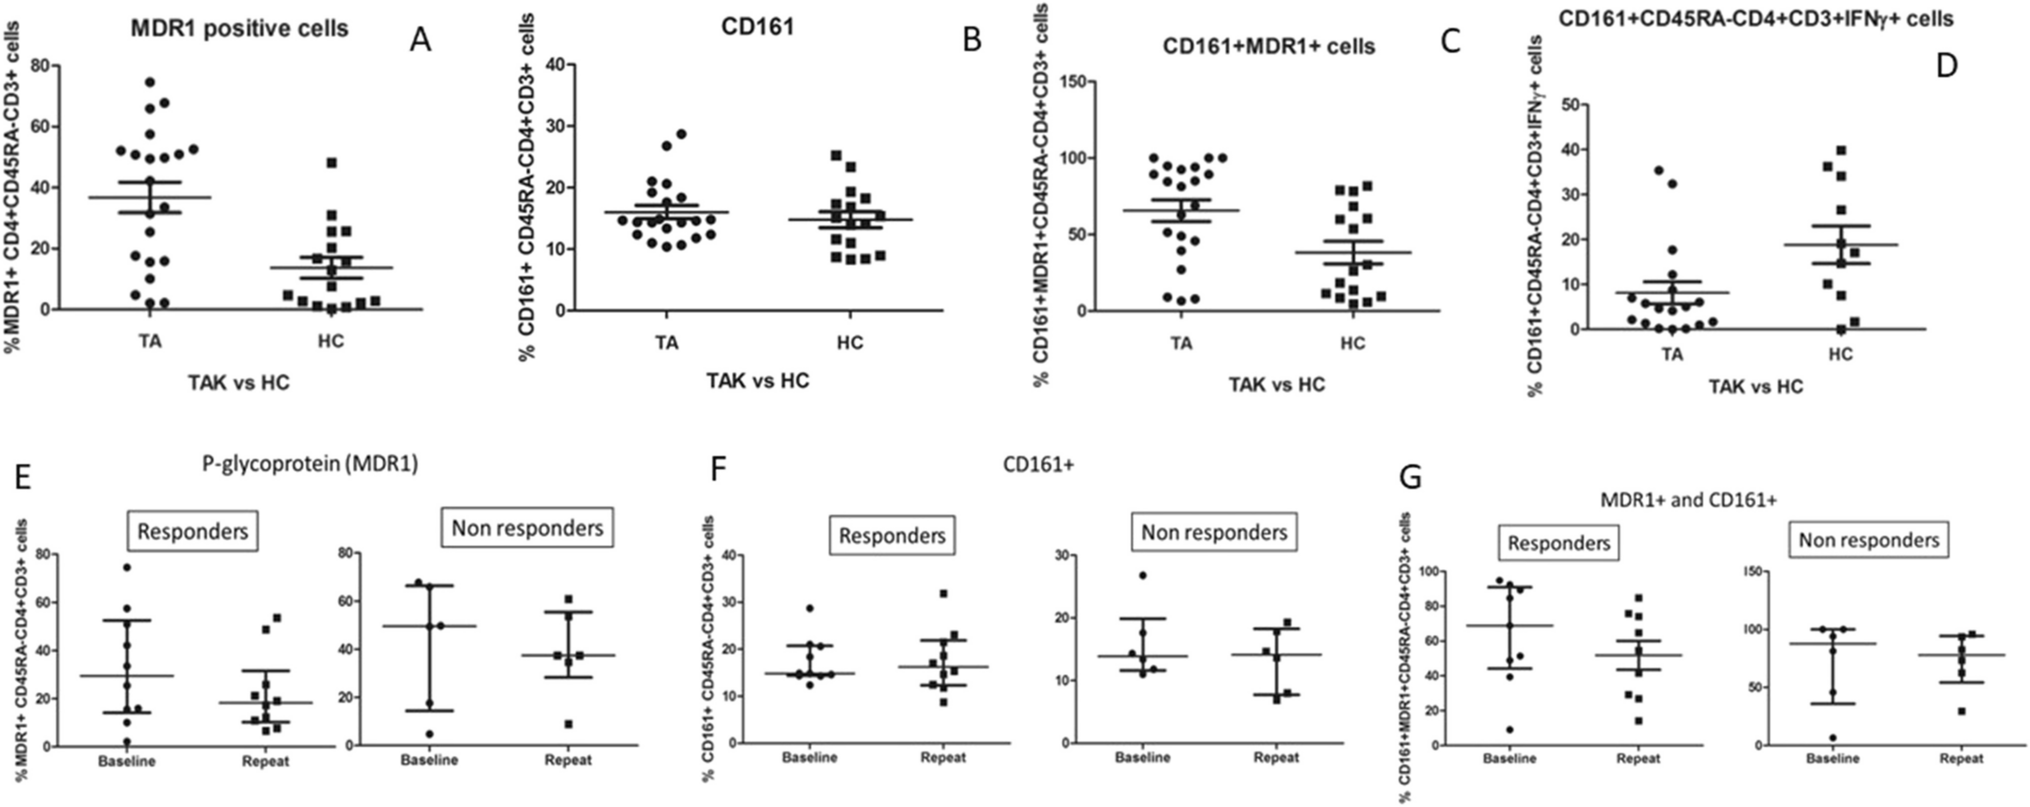 Study of pathogenic T-helper cell subsets in Asian Indian patients with Takayasu arteritis